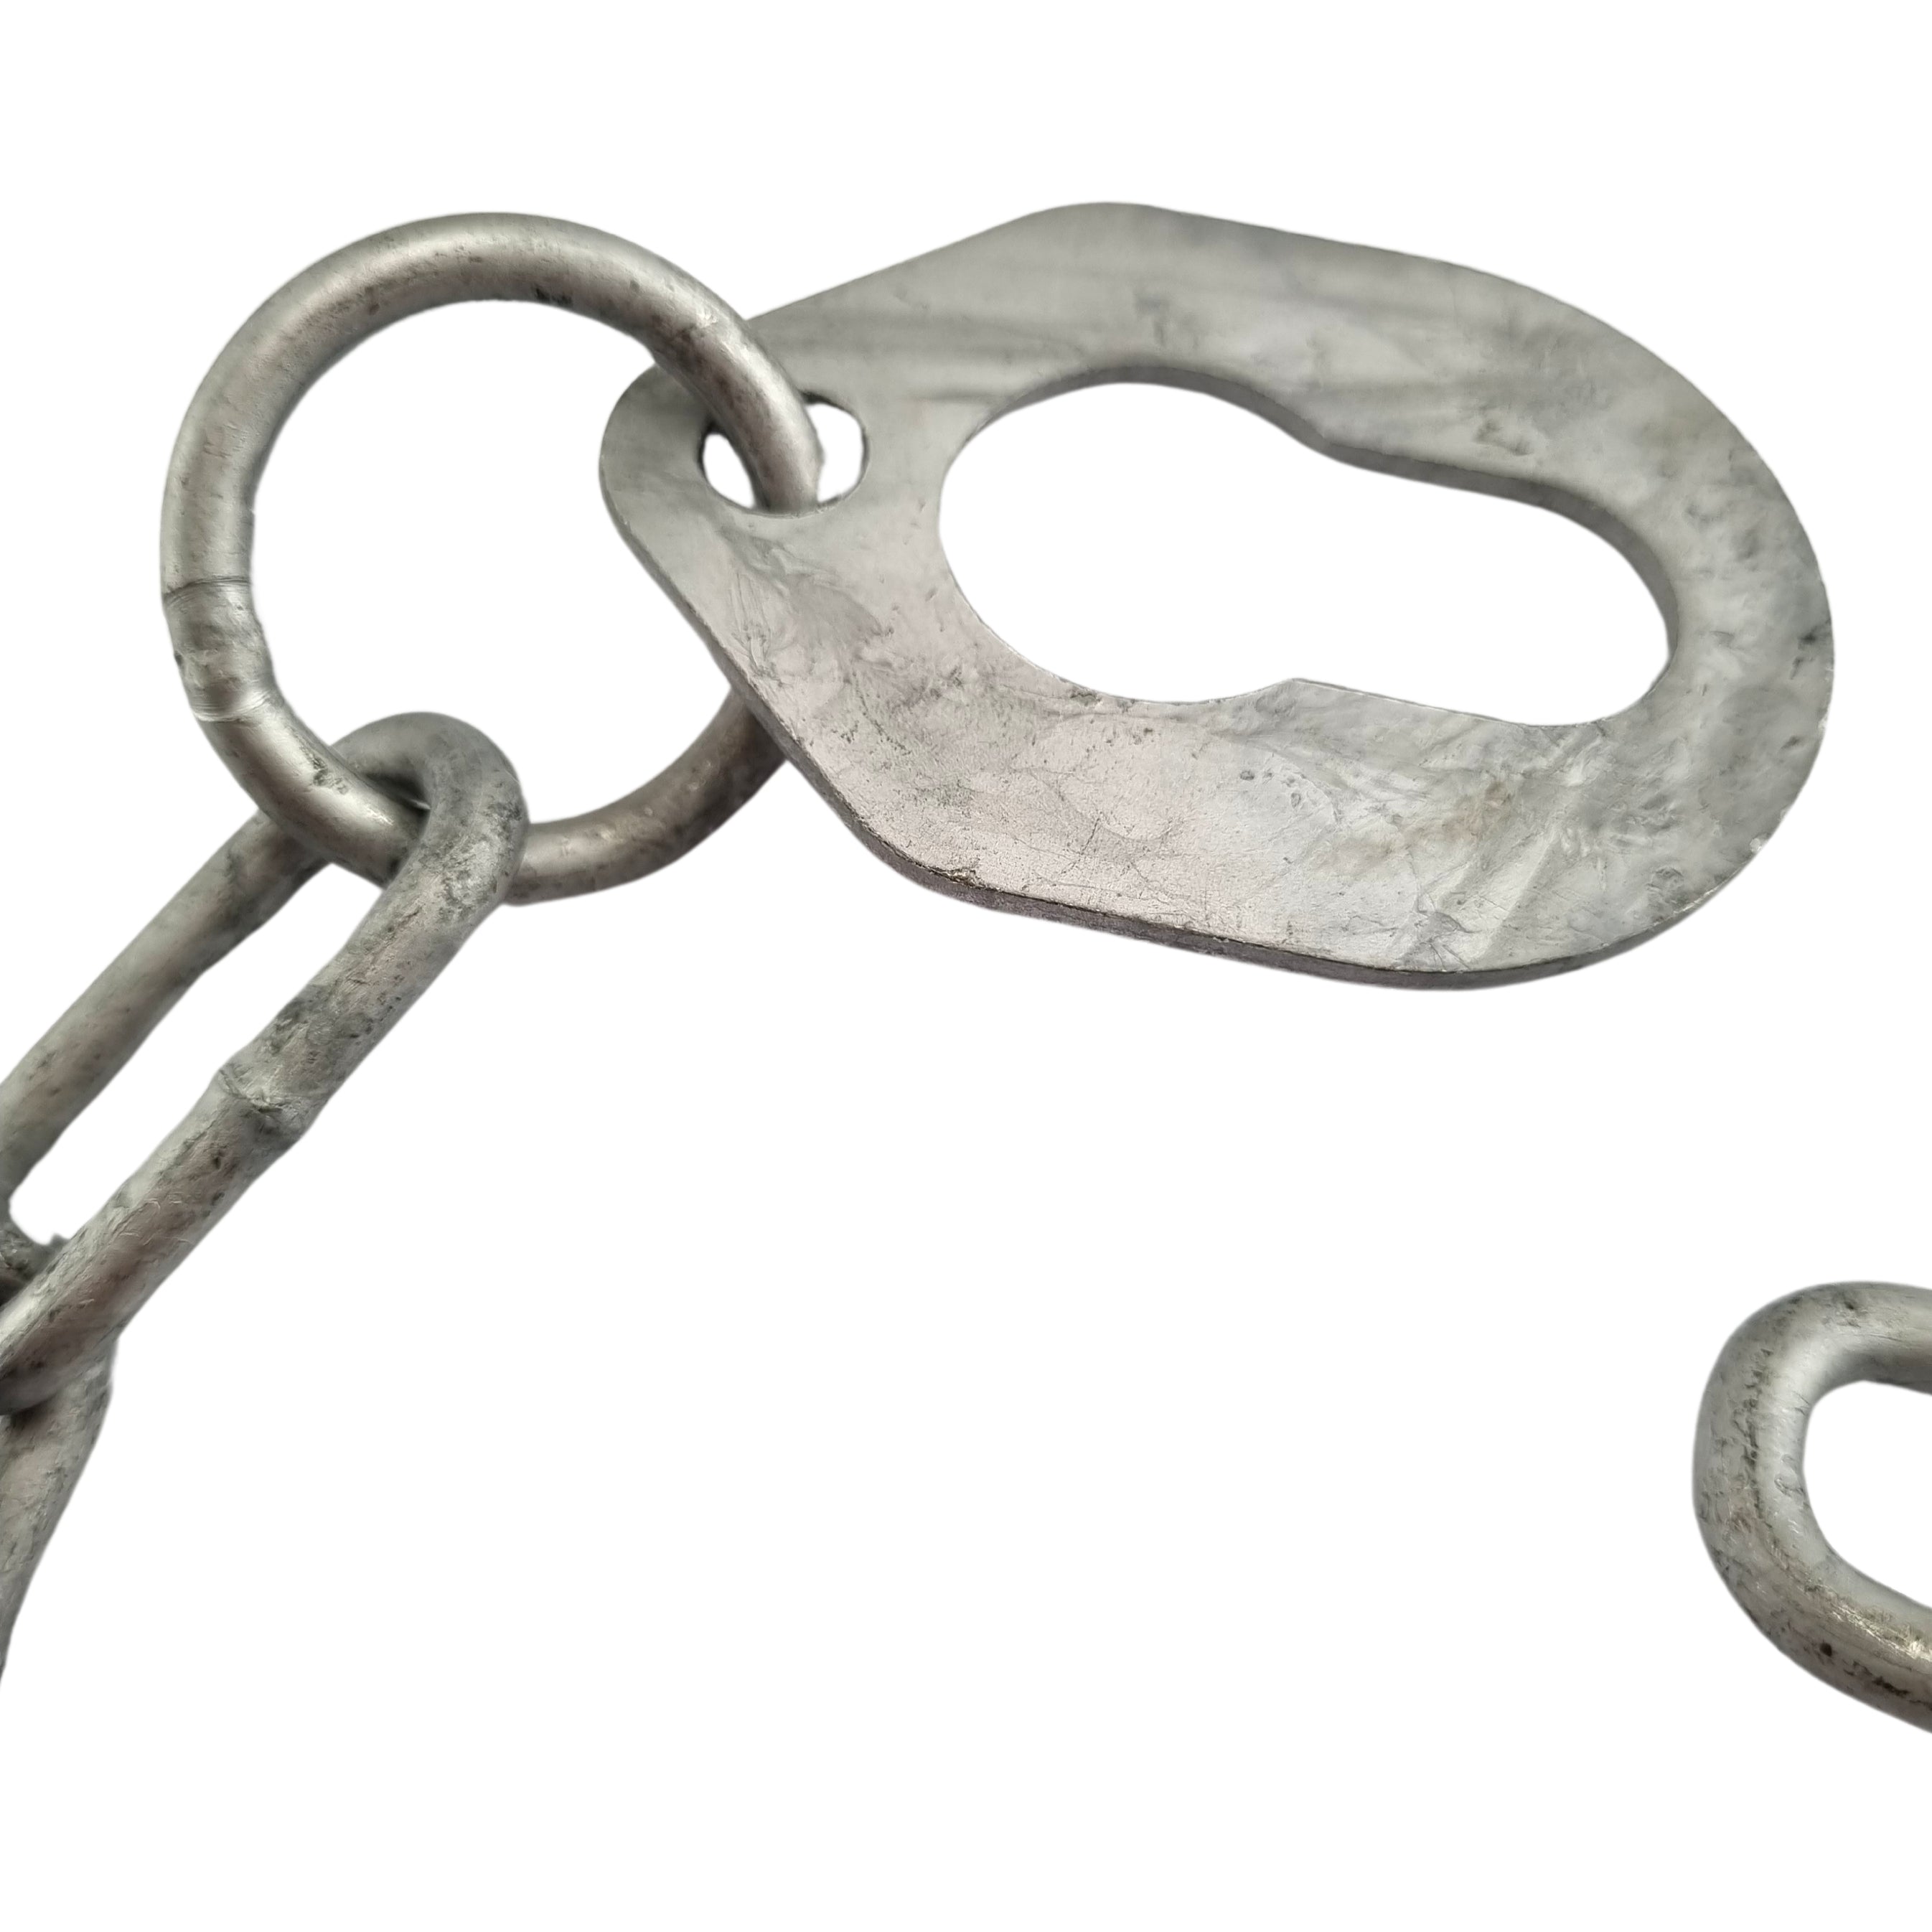 Chain Catch - Galvanised. Code: CAC4-2. Australian Made. Fence & Gate Fittings. Shop online chain.com.au. Australia wide shipping.